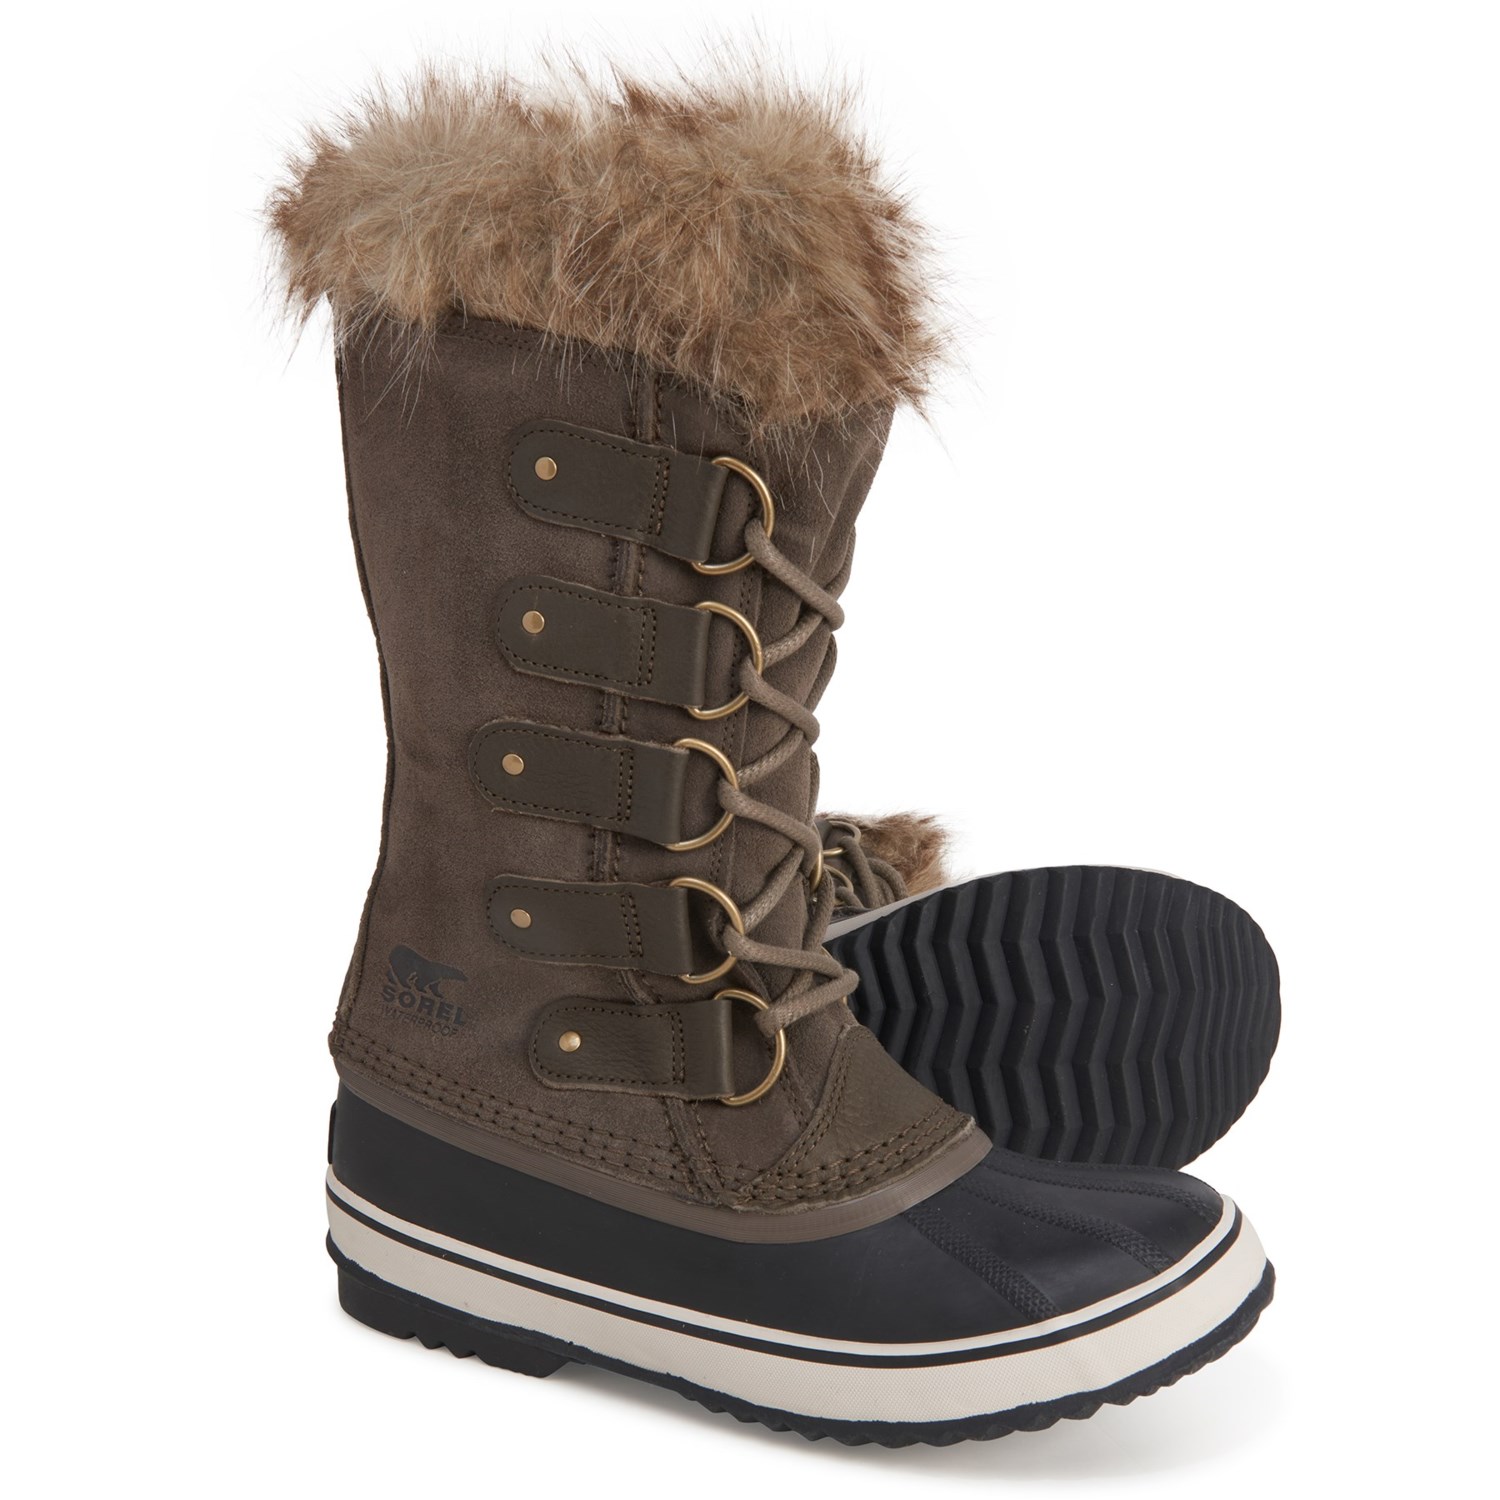 arctic pac boots